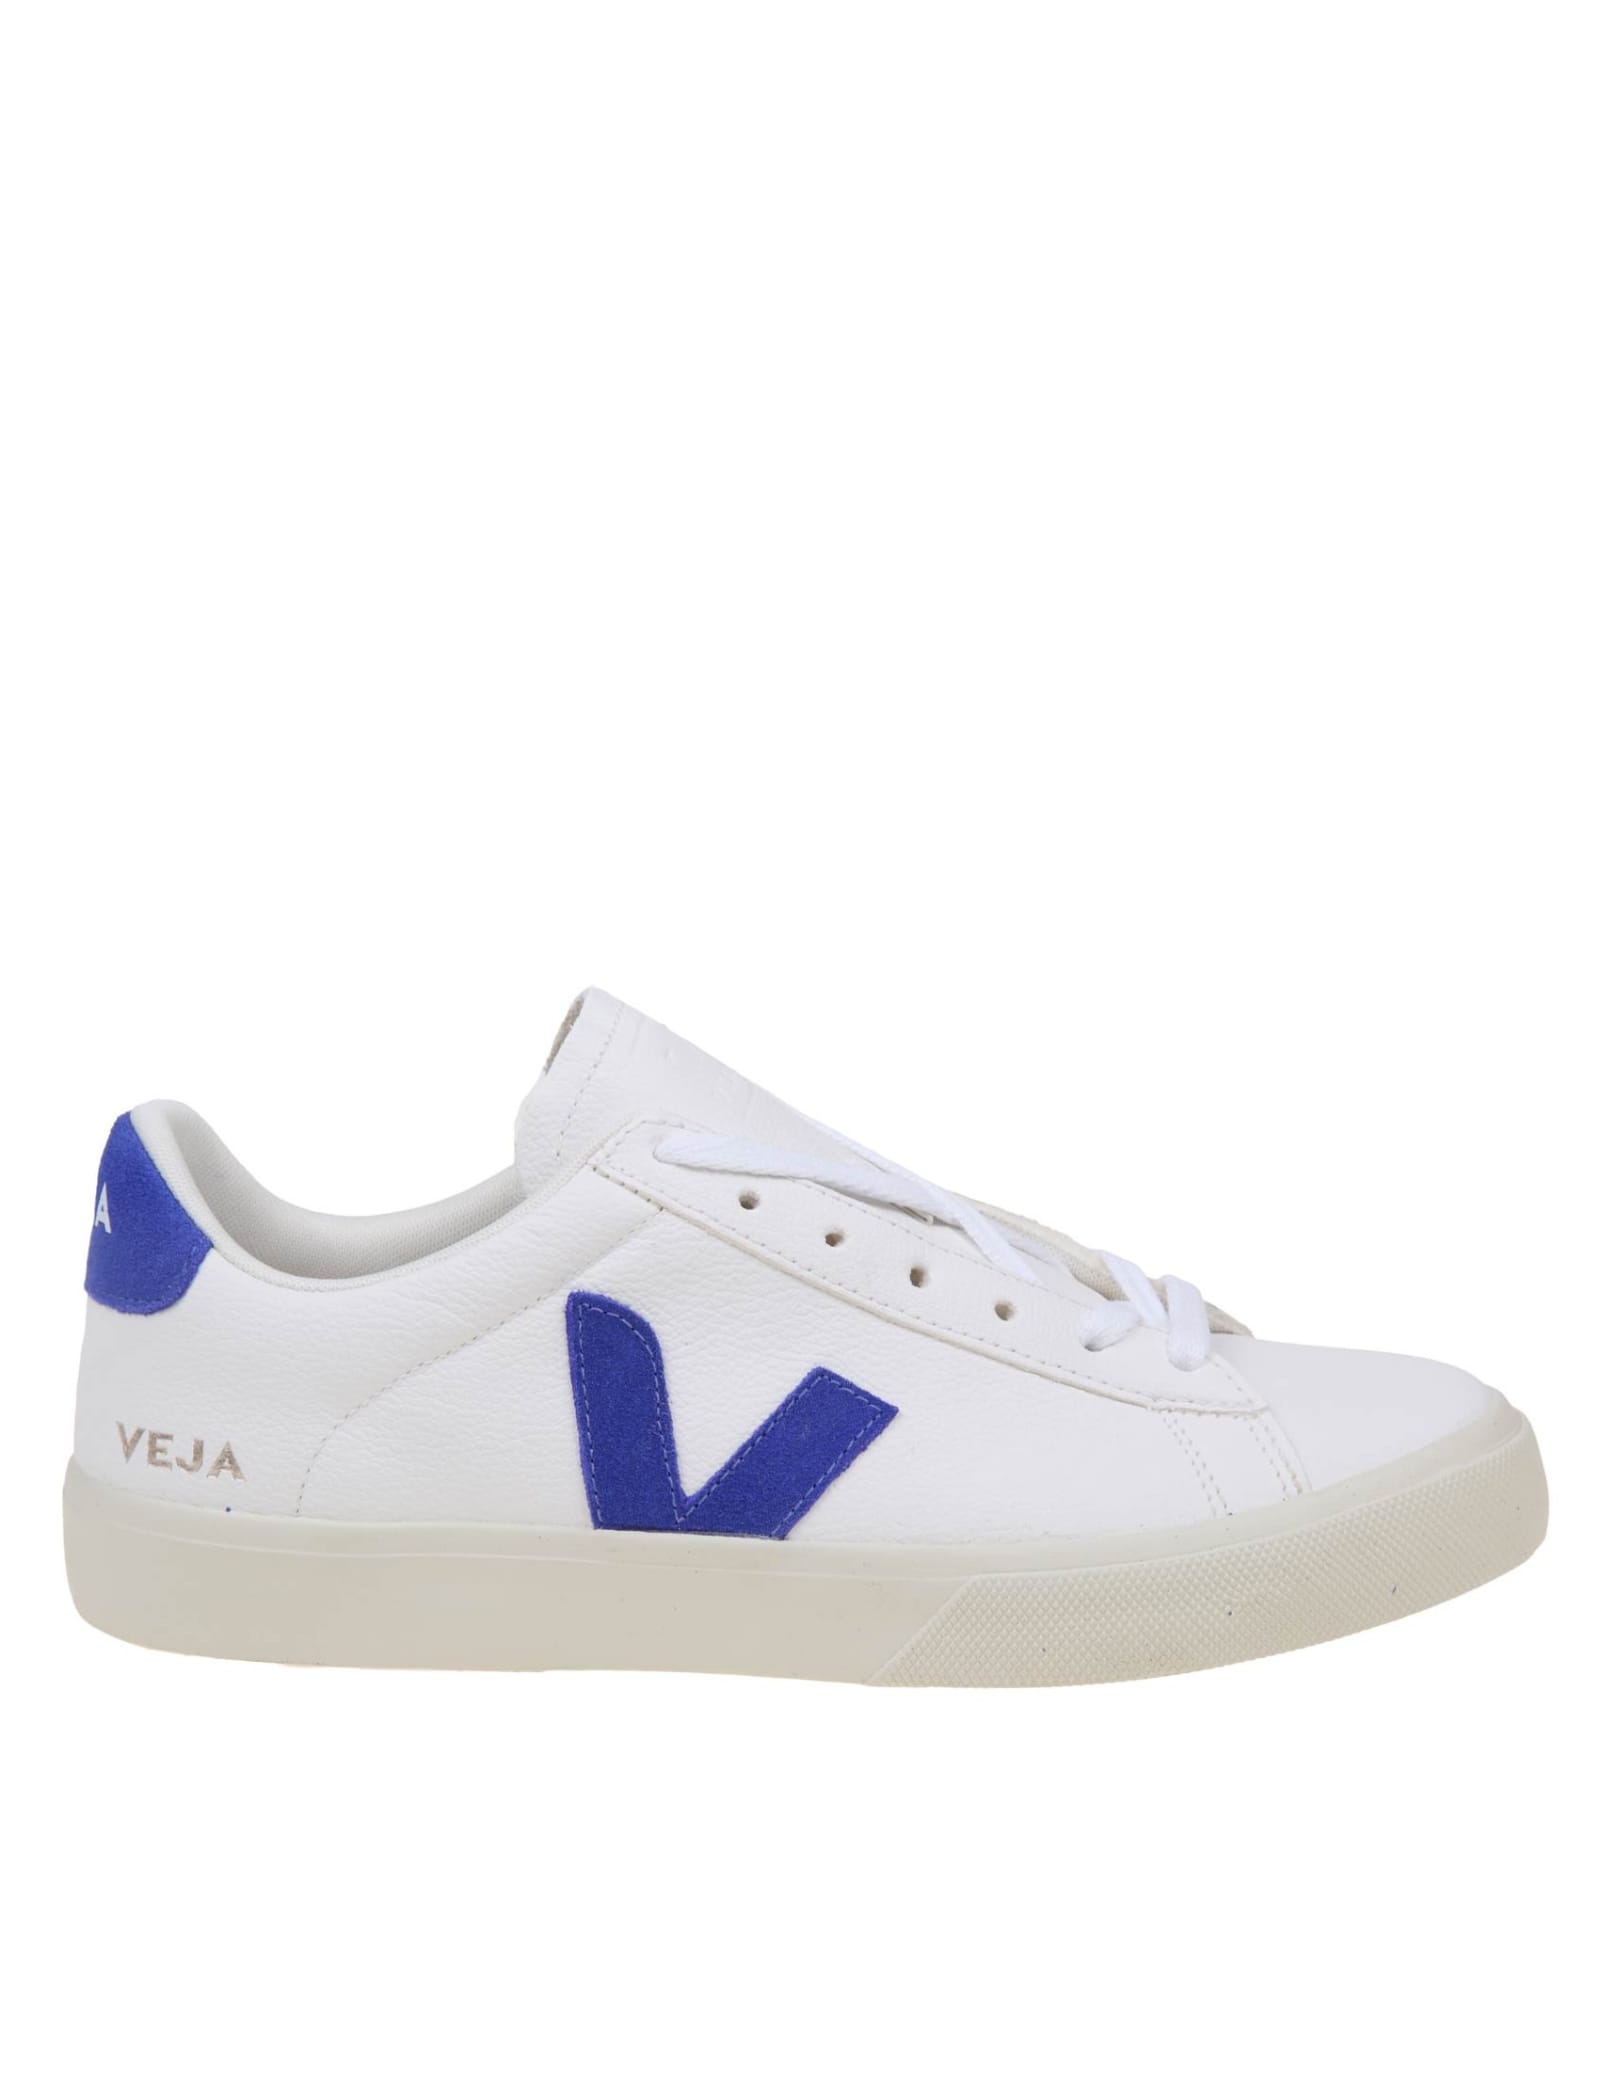 VEJA CAMPO SNEAKERS IN WHITE AND BLUE LEATHER